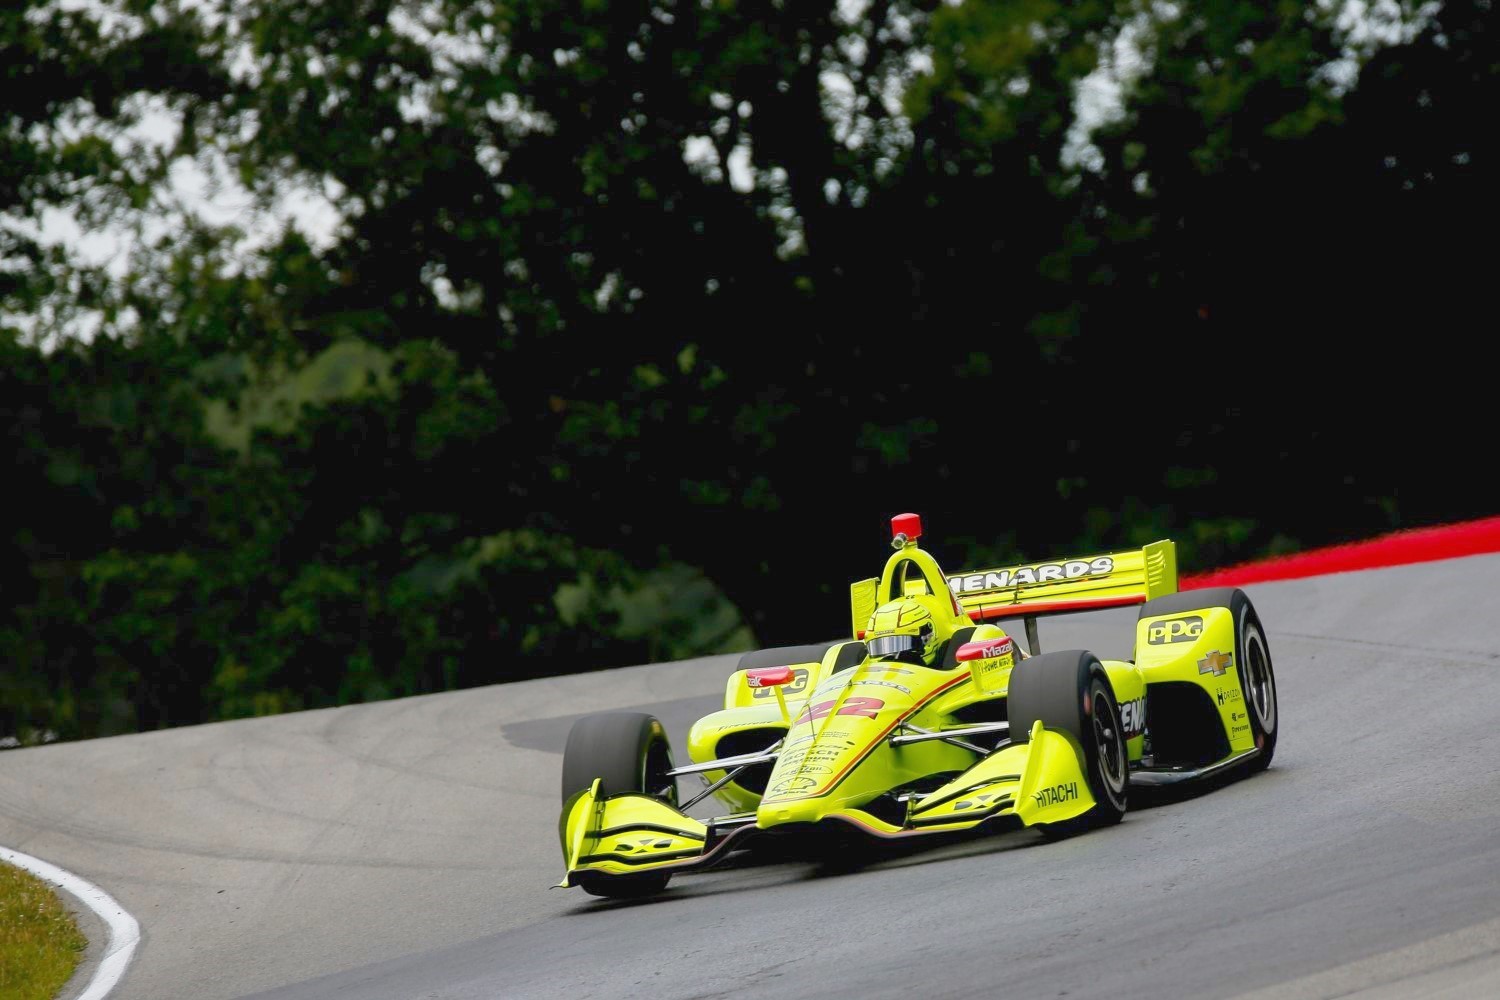 It's been a tough weekend for Simon Pagenaud 